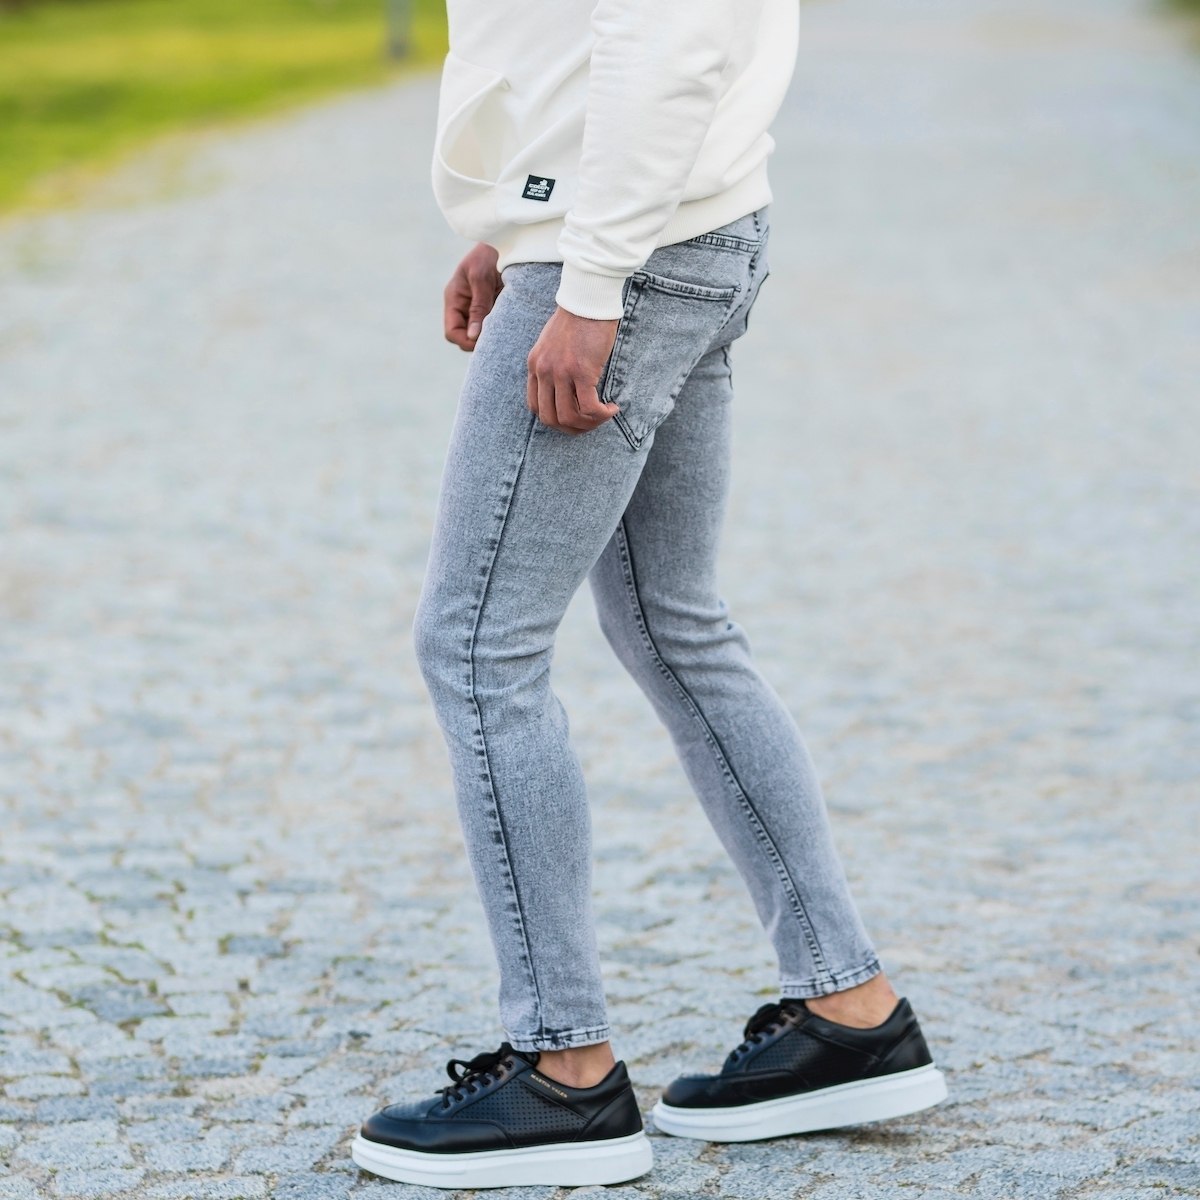 Men's Basic Skinny Jeans In Washed Gray - 2